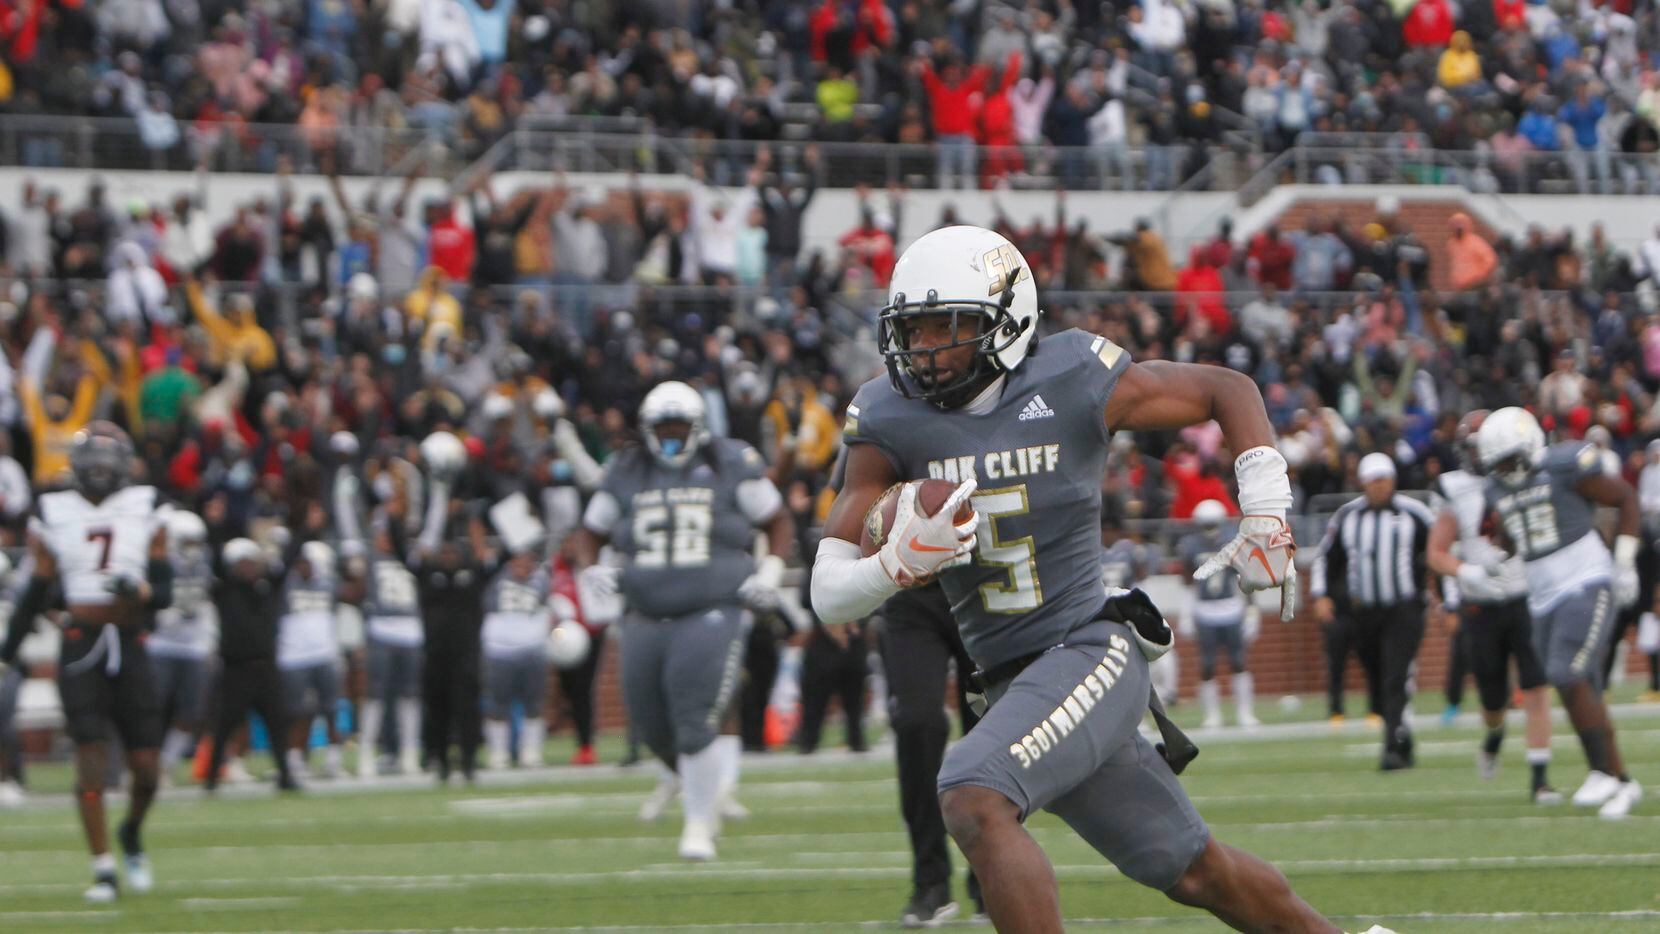 South Oak Cliff receiver Randy Reece (5) sprints to the end zone with the game winning...